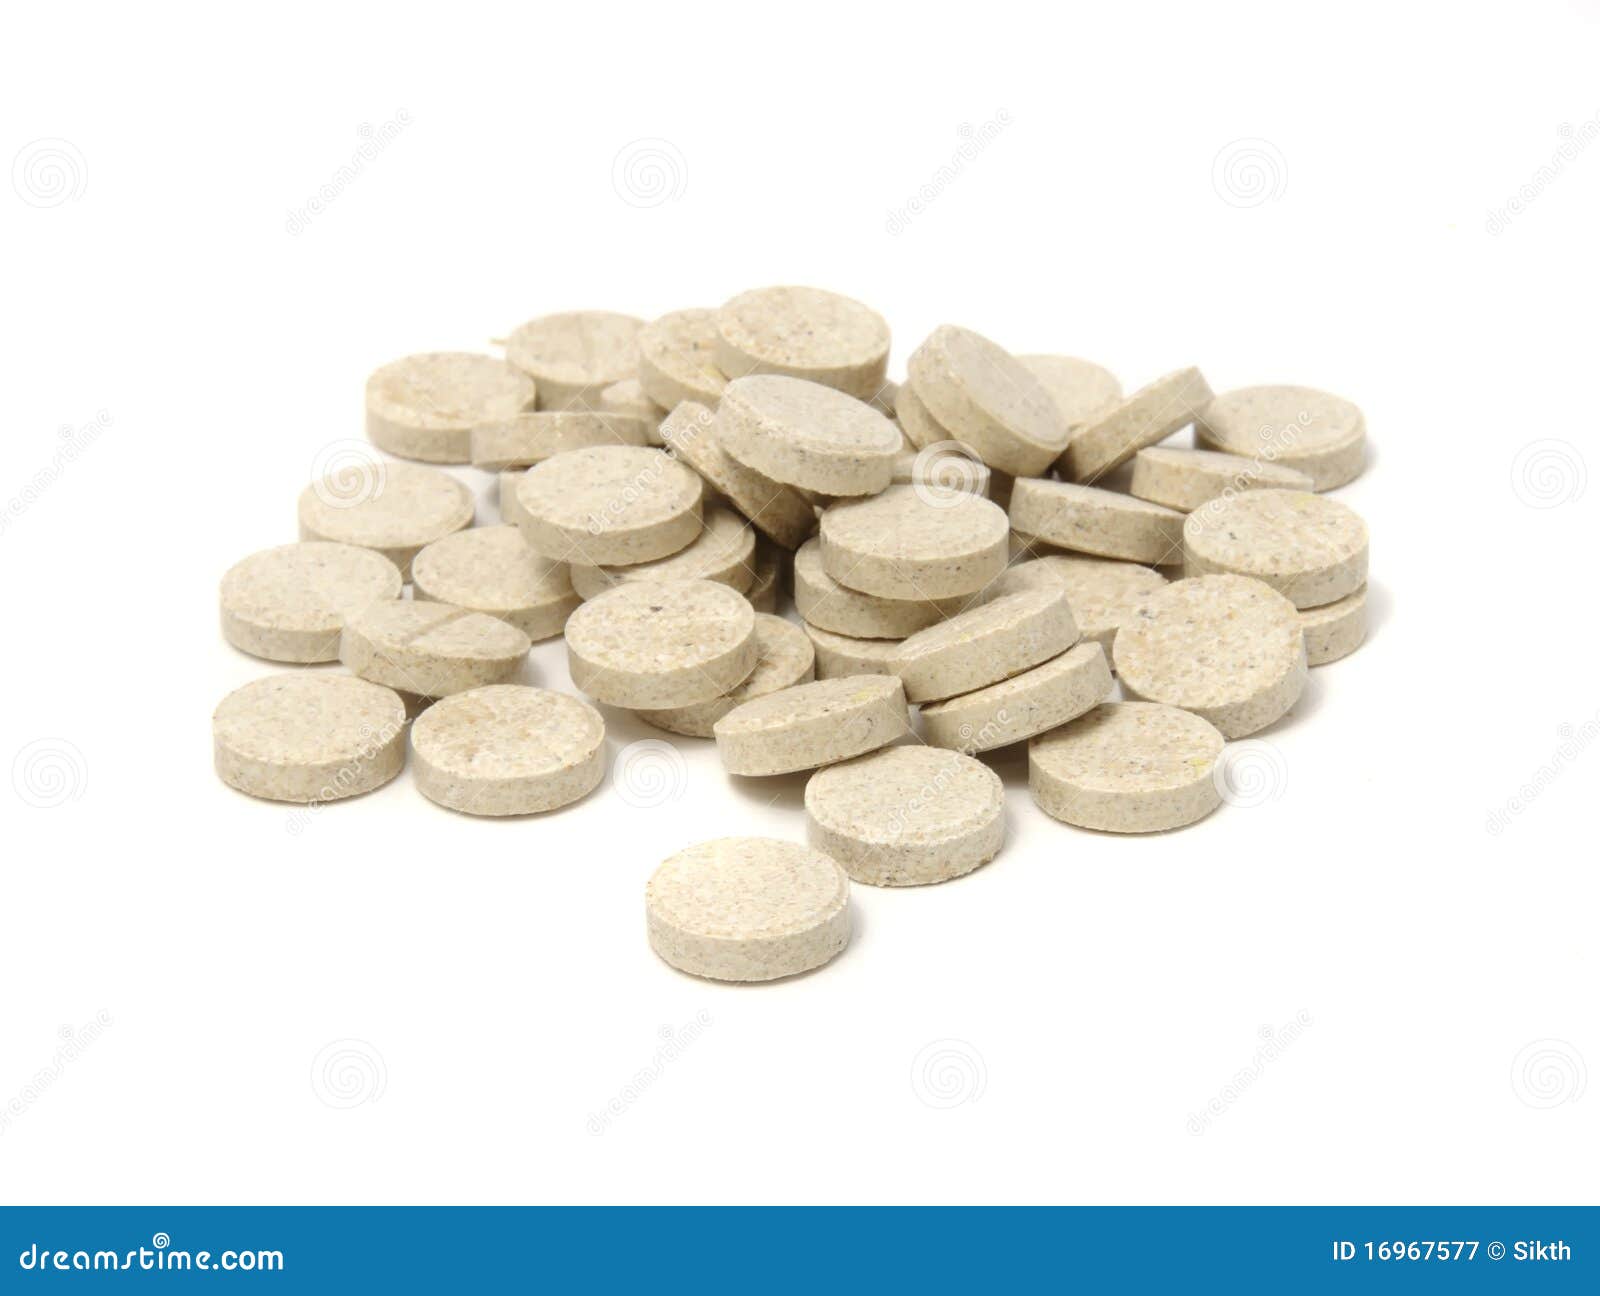 brewer's yeast tablets